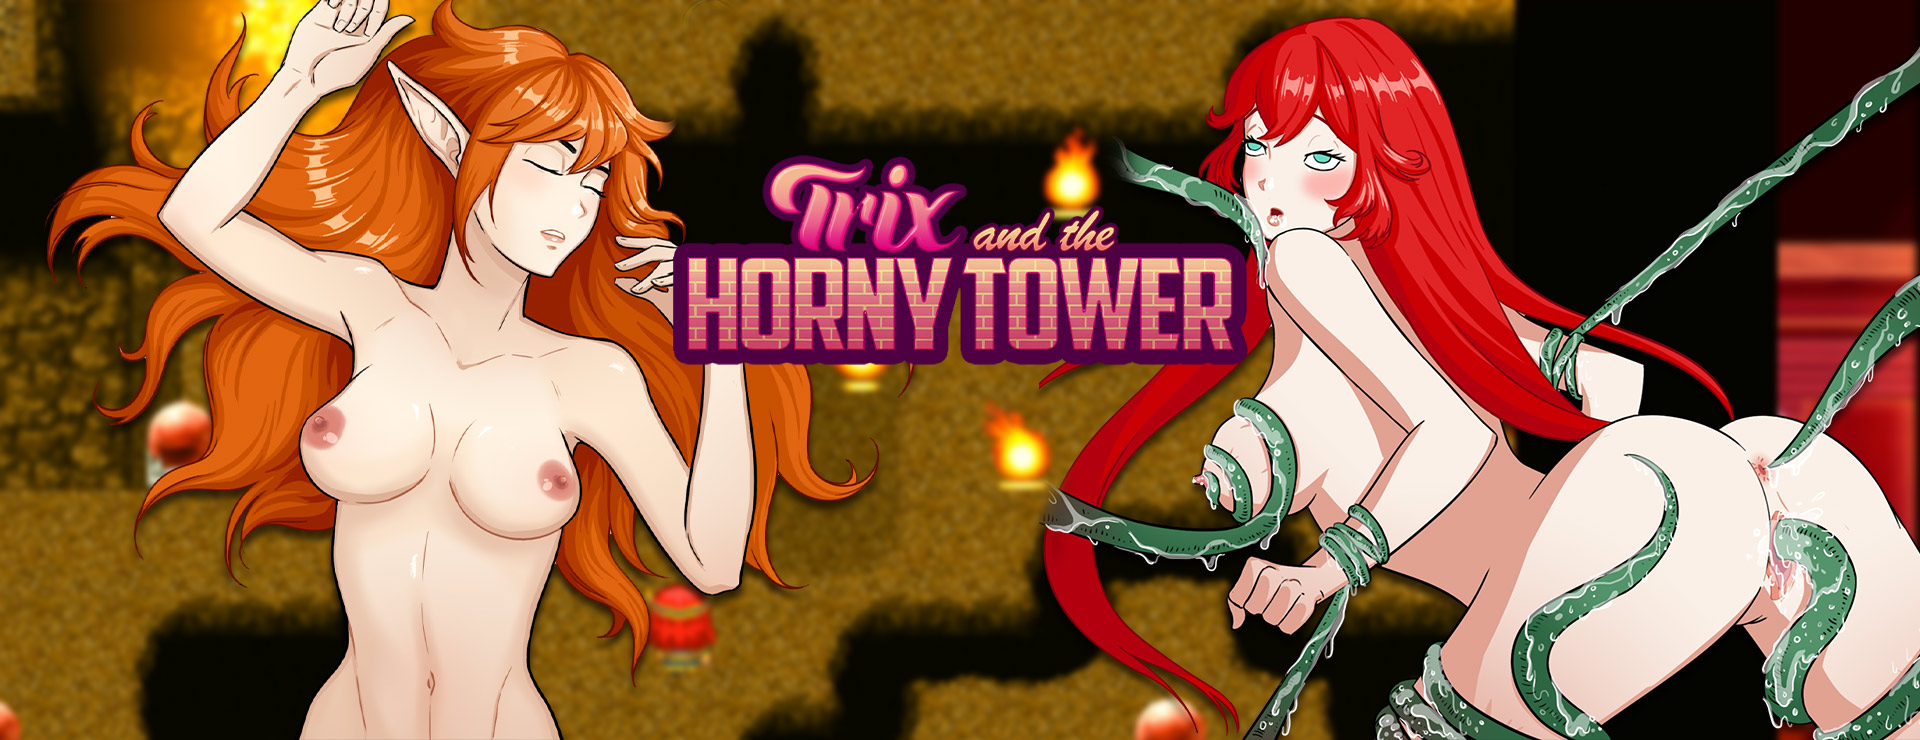 Trix and the Horny Tower - RPG Gra